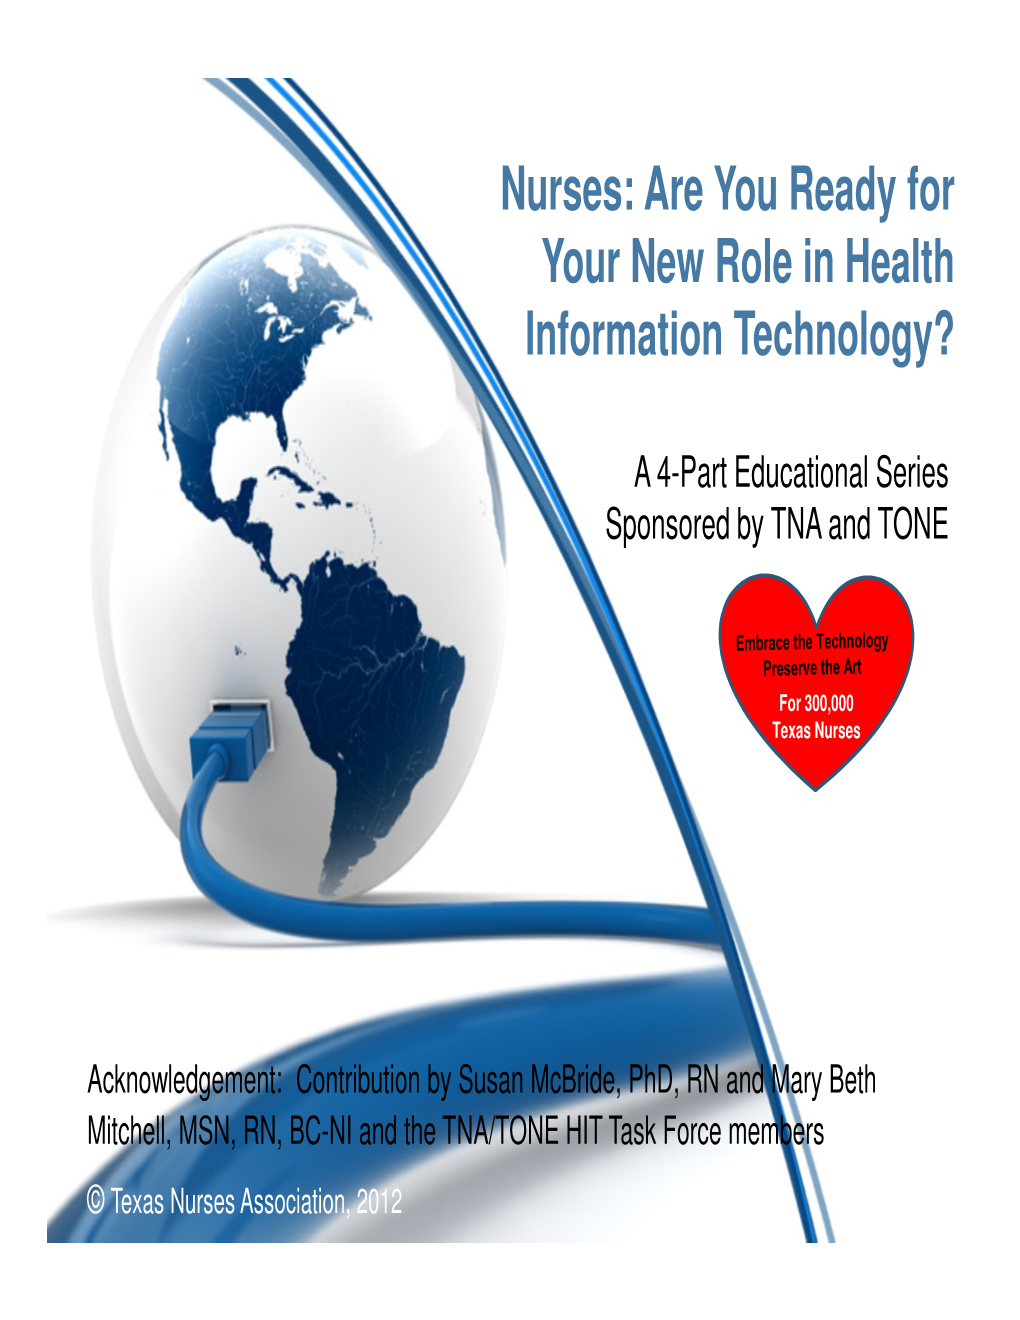 Nurses: Are You Ready for Your New Role in Health Information Technology?